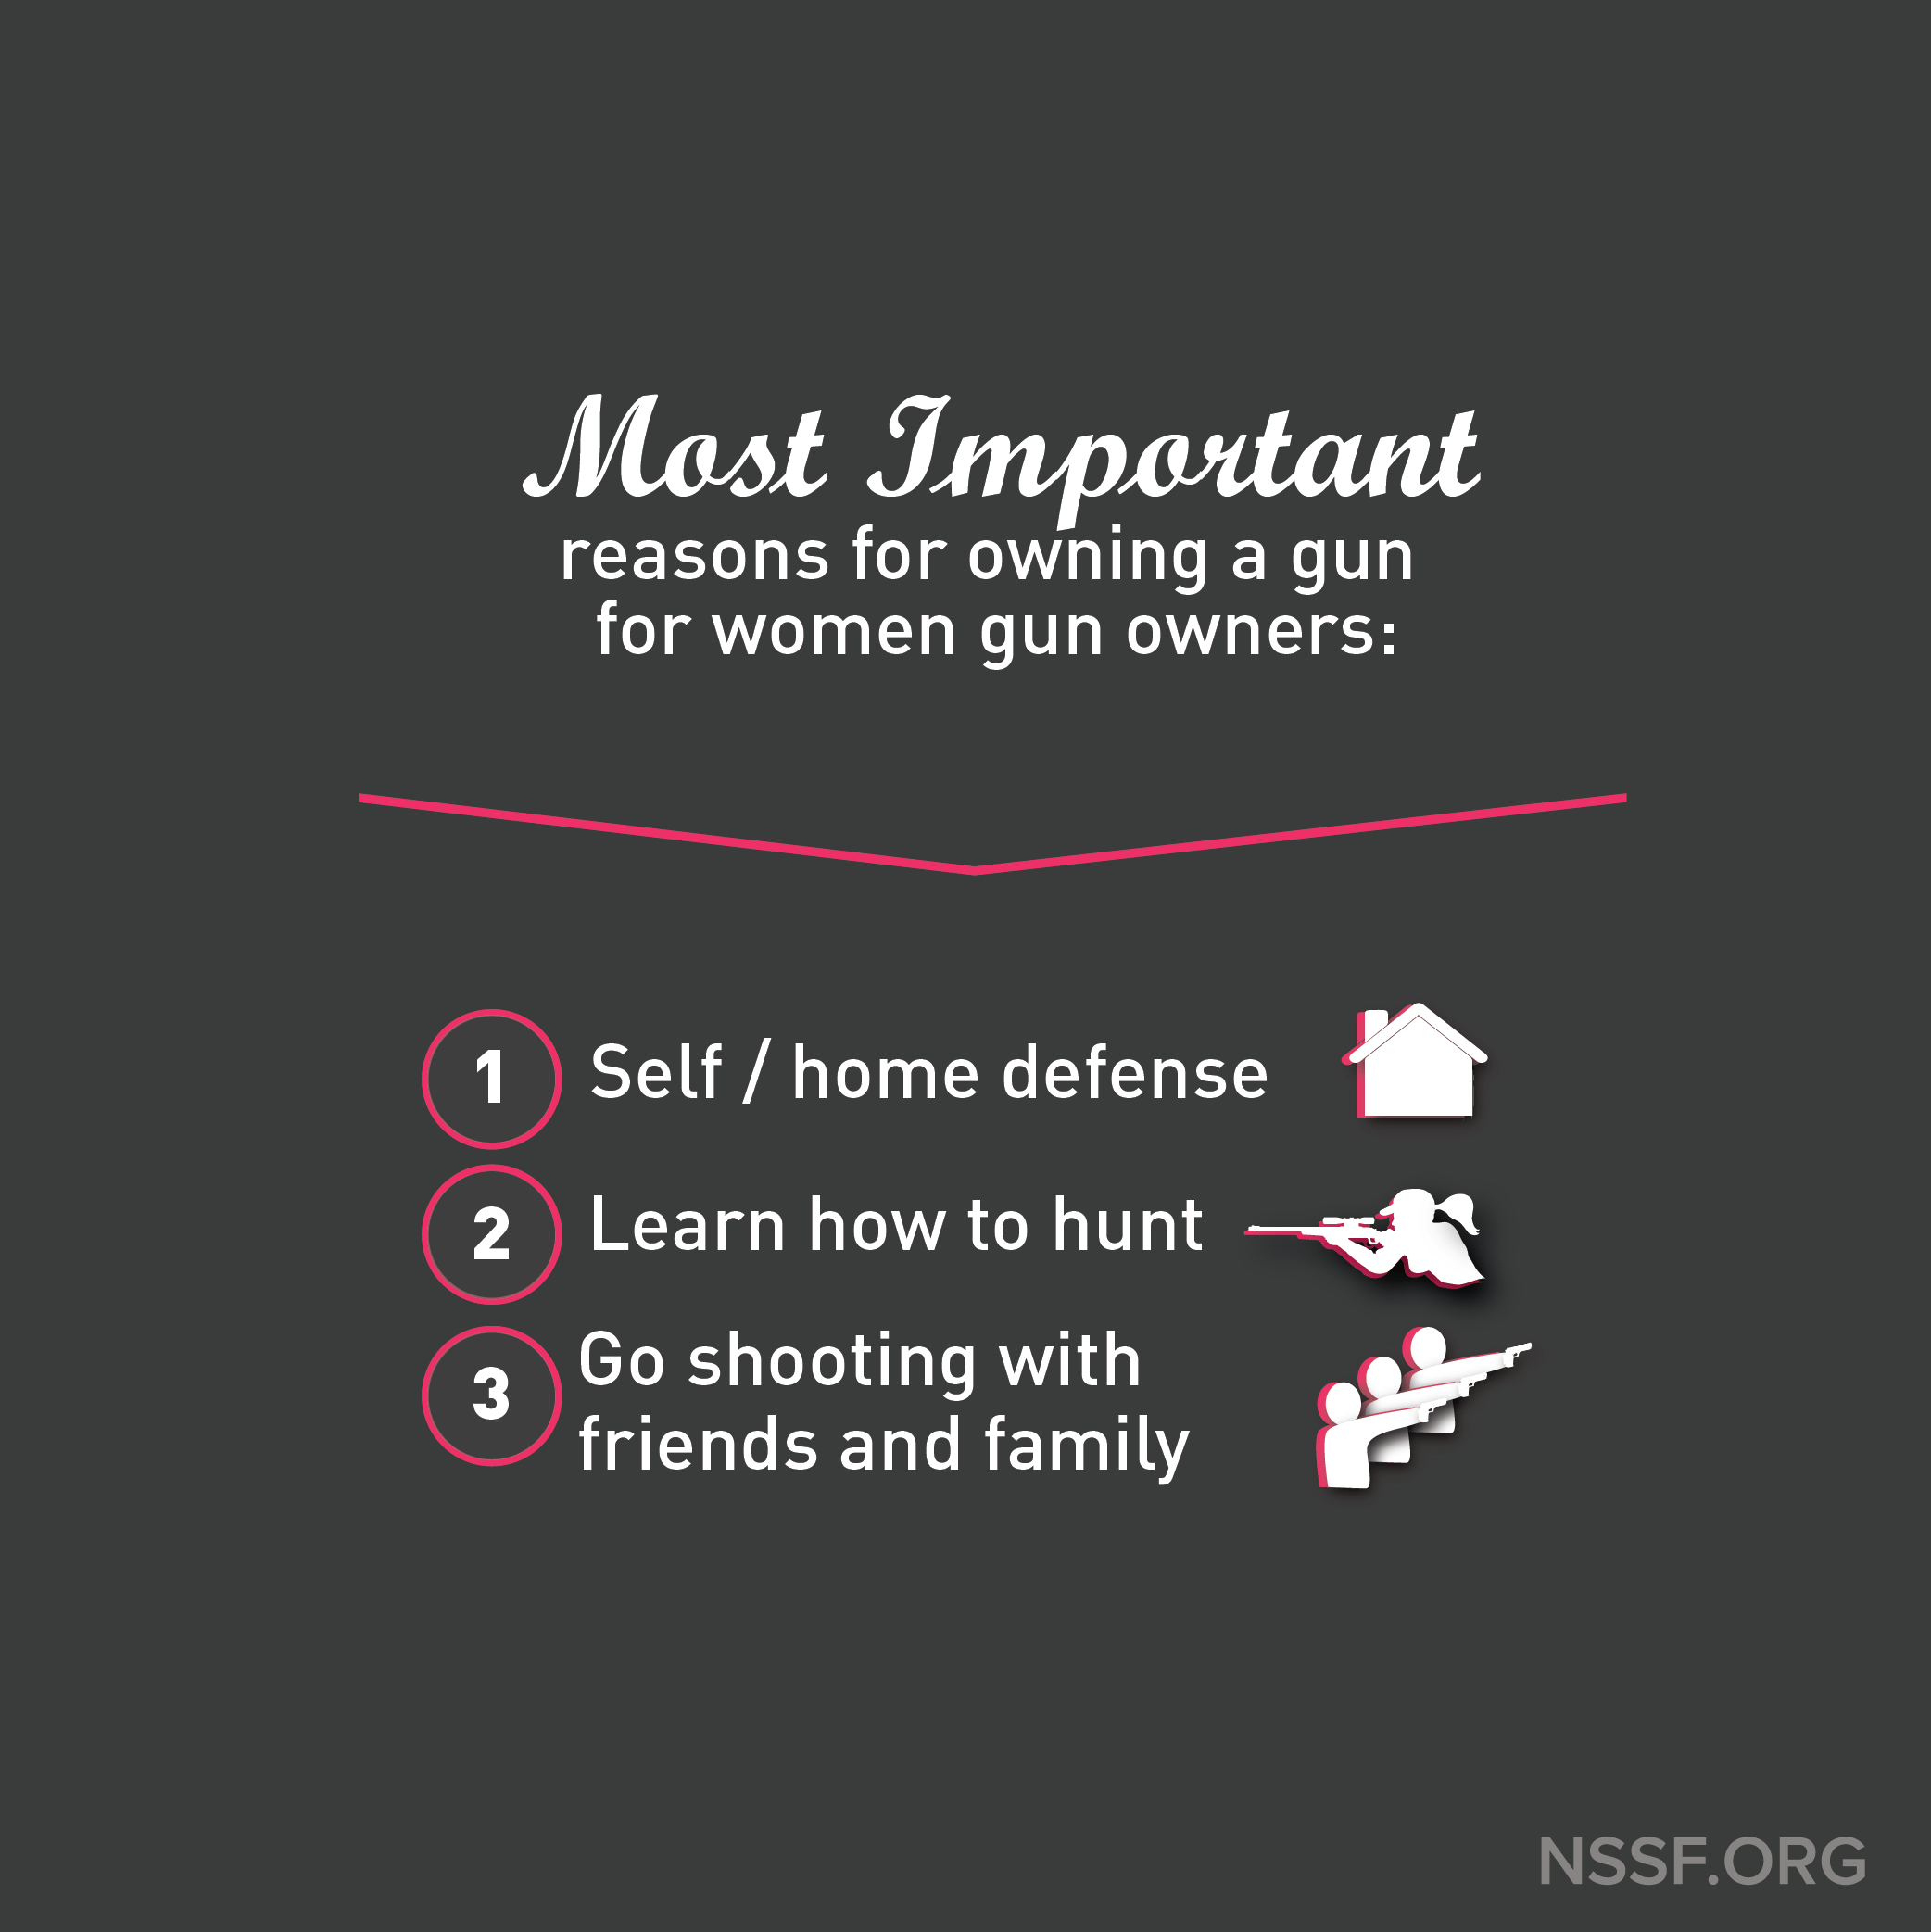 The+Most+important+reasons+for+owning+a+gun+for+women+gun+owners+are+Self+Defense,+learning+to+hunt+and+go+shooting+with+family+and+friends.